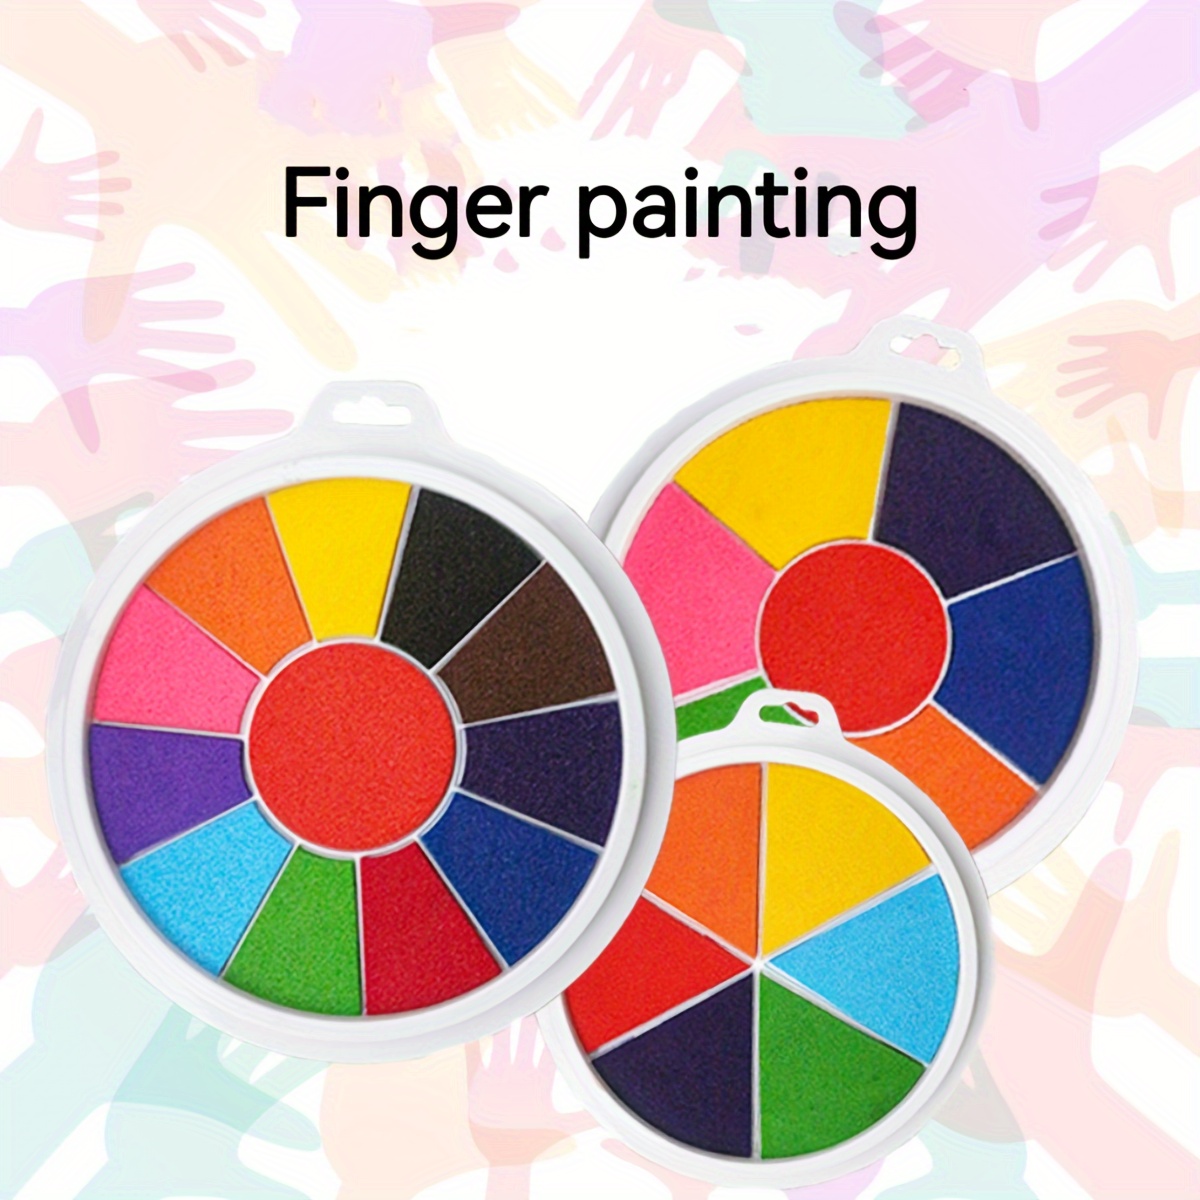 Fun Finger Painting and Book Kits for Kids Washable Finger Paint, Finger Drawing Toys for Kids, Craft Painting, School Painting, 12 Colors